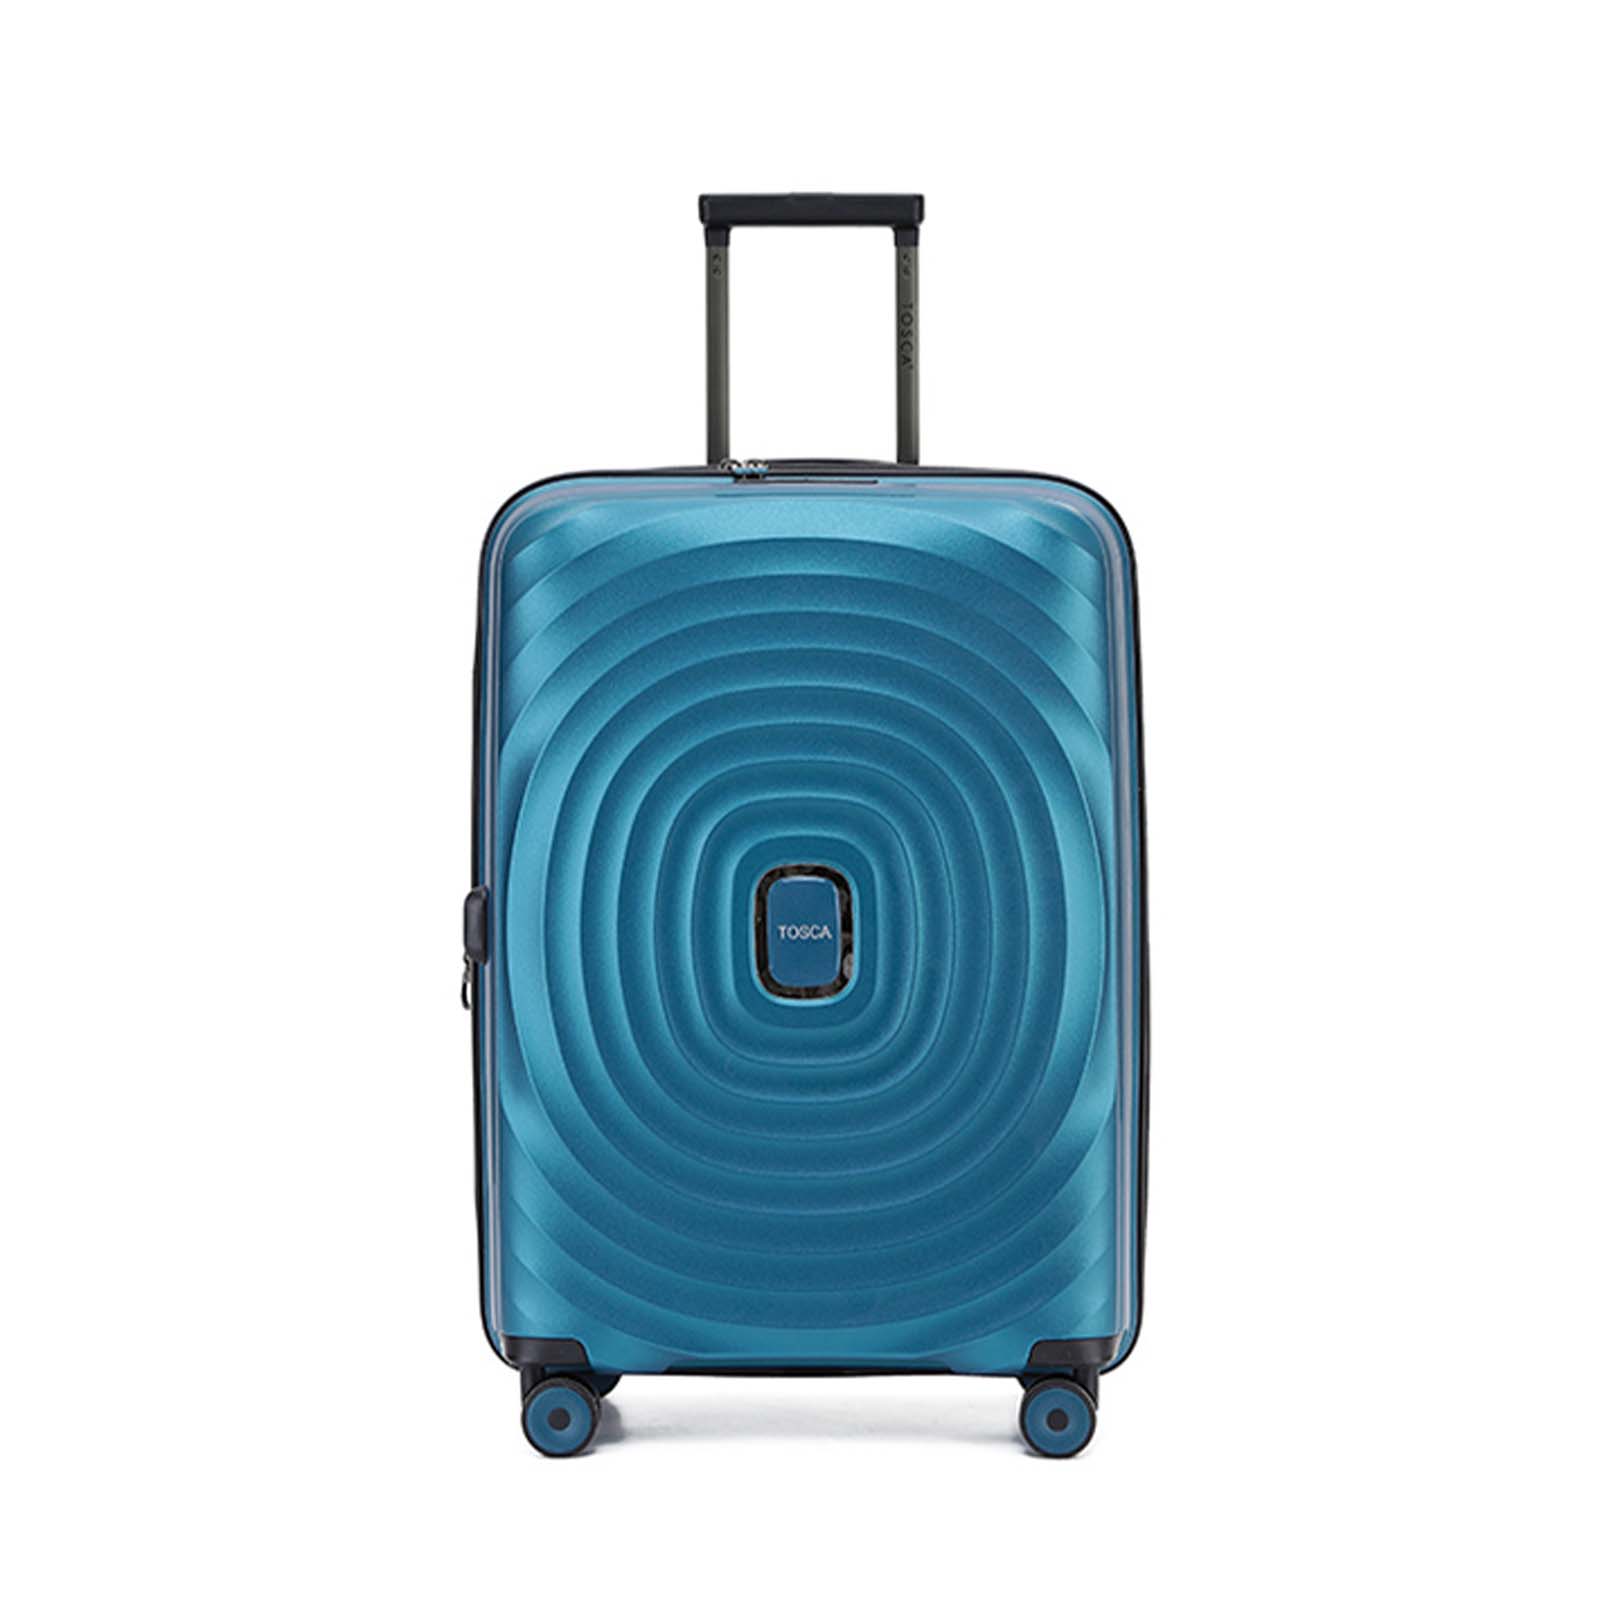 tosca-eclipse-4-wheel-67cm-carry-on-suitcase-blue-front